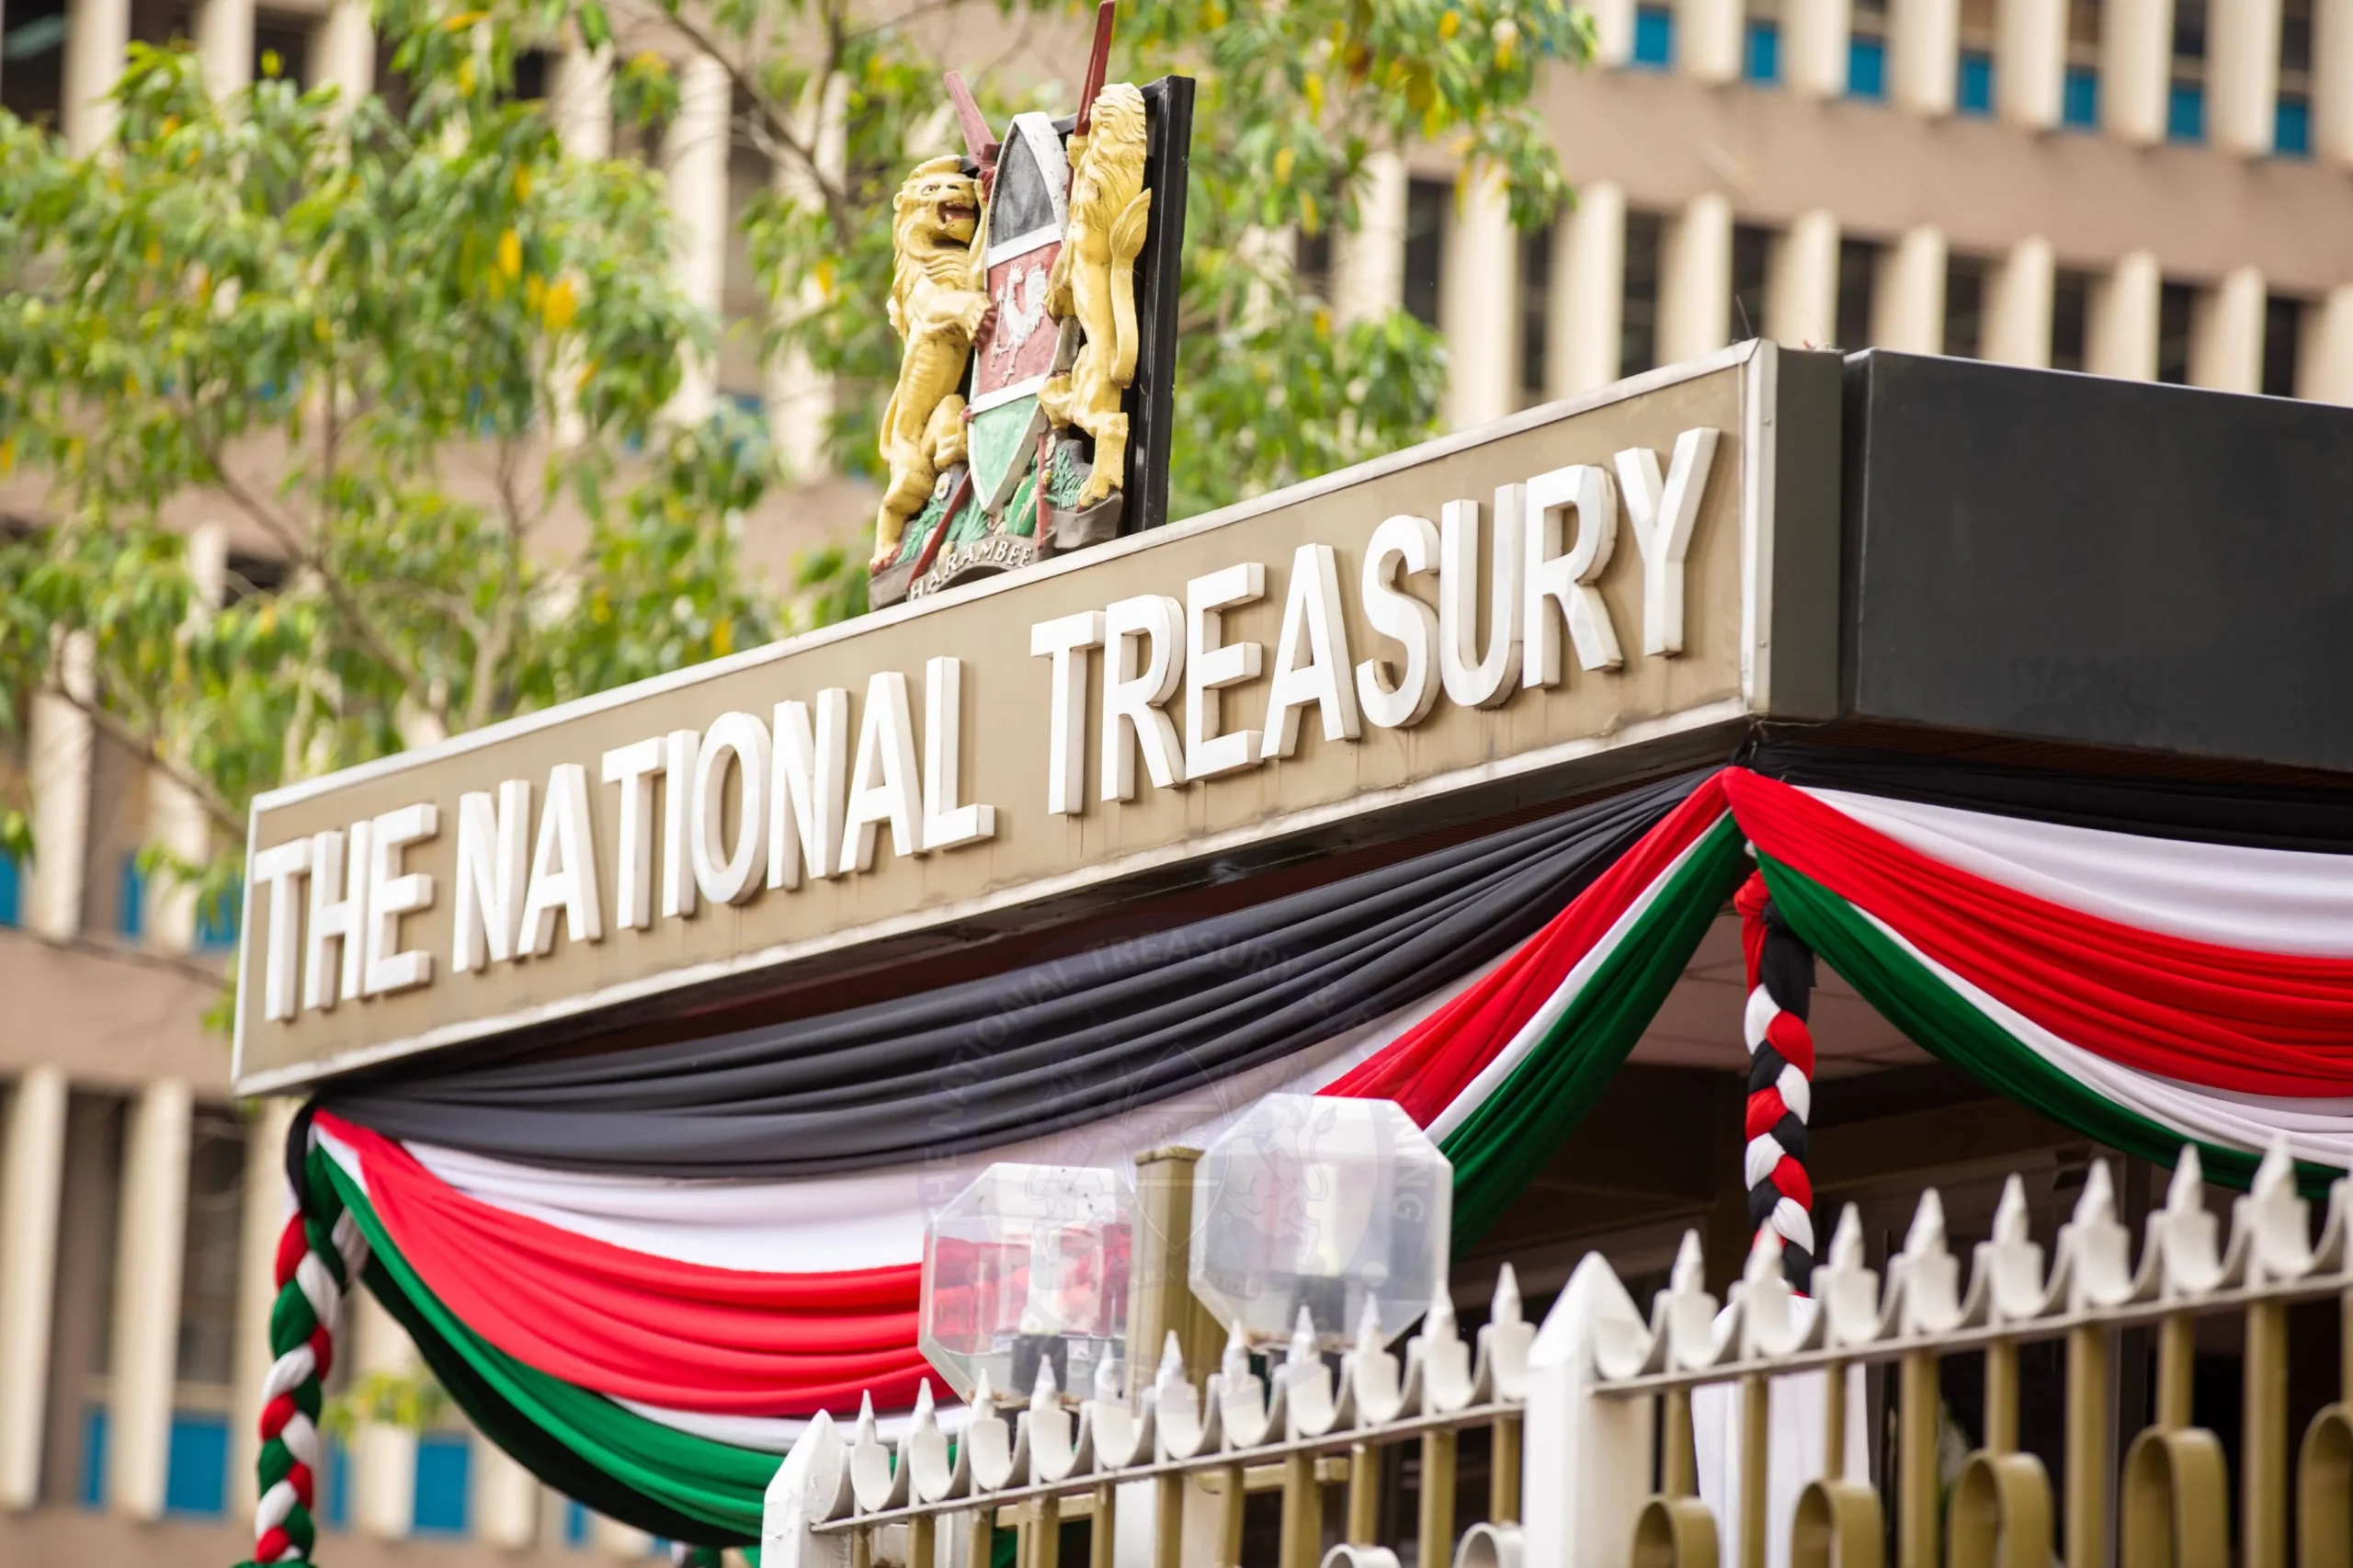 Fleet Management Solution Leasing Tender Row Hits The National Treasury